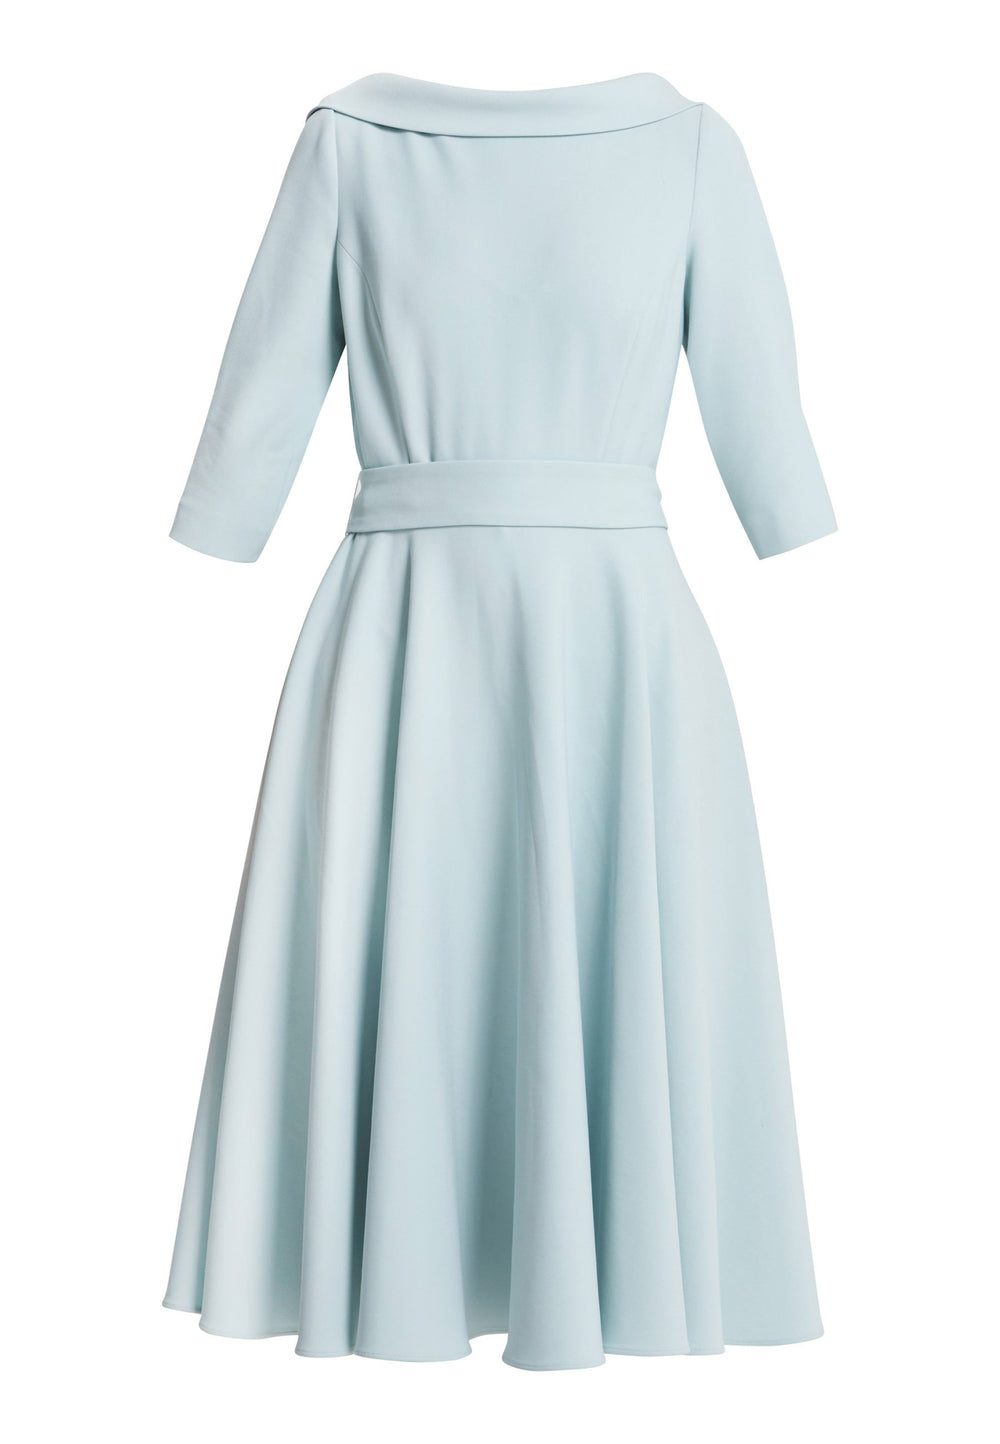 Luna is a captivating choice for your upcoming occassions. An elegant dress with a cowl collar that ties at the back . Cut from a summer mist tone in our signature sustainably sourced trictotine with a hint of stretch. The silhouette is rooted in simplicity with a fitted bodice and flared skirt. Features side seam pockets and a detachable belt. Attending a summer wedding? Mother of the bride? Heading to the races? This is the dress for you. Simply pair with heels to compliment this elegant design.